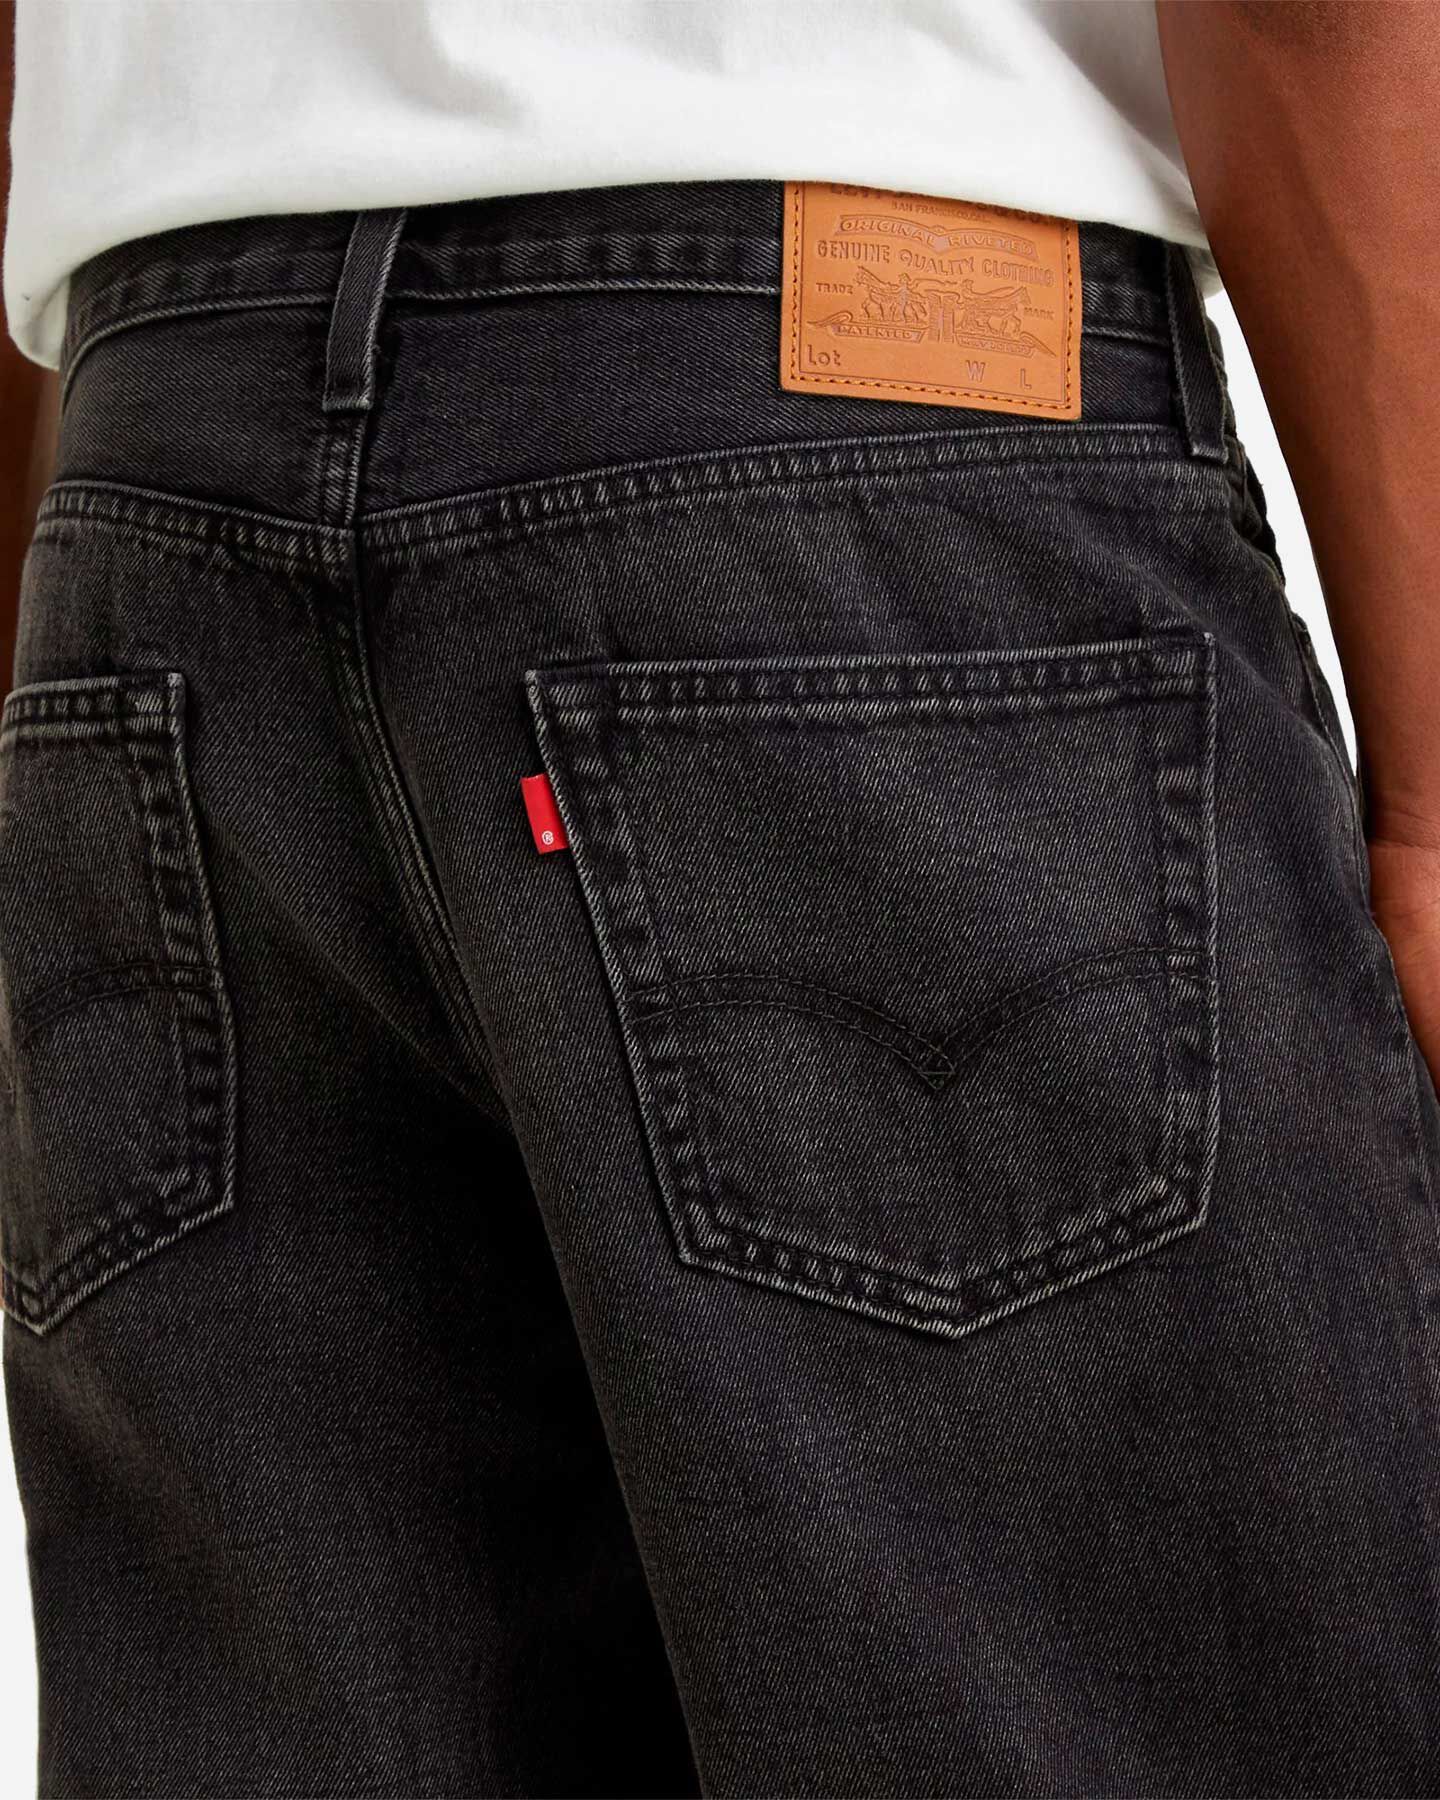  Jeans LEVI'S STAY LOOSE M S4113280|0038|29 scatto 5